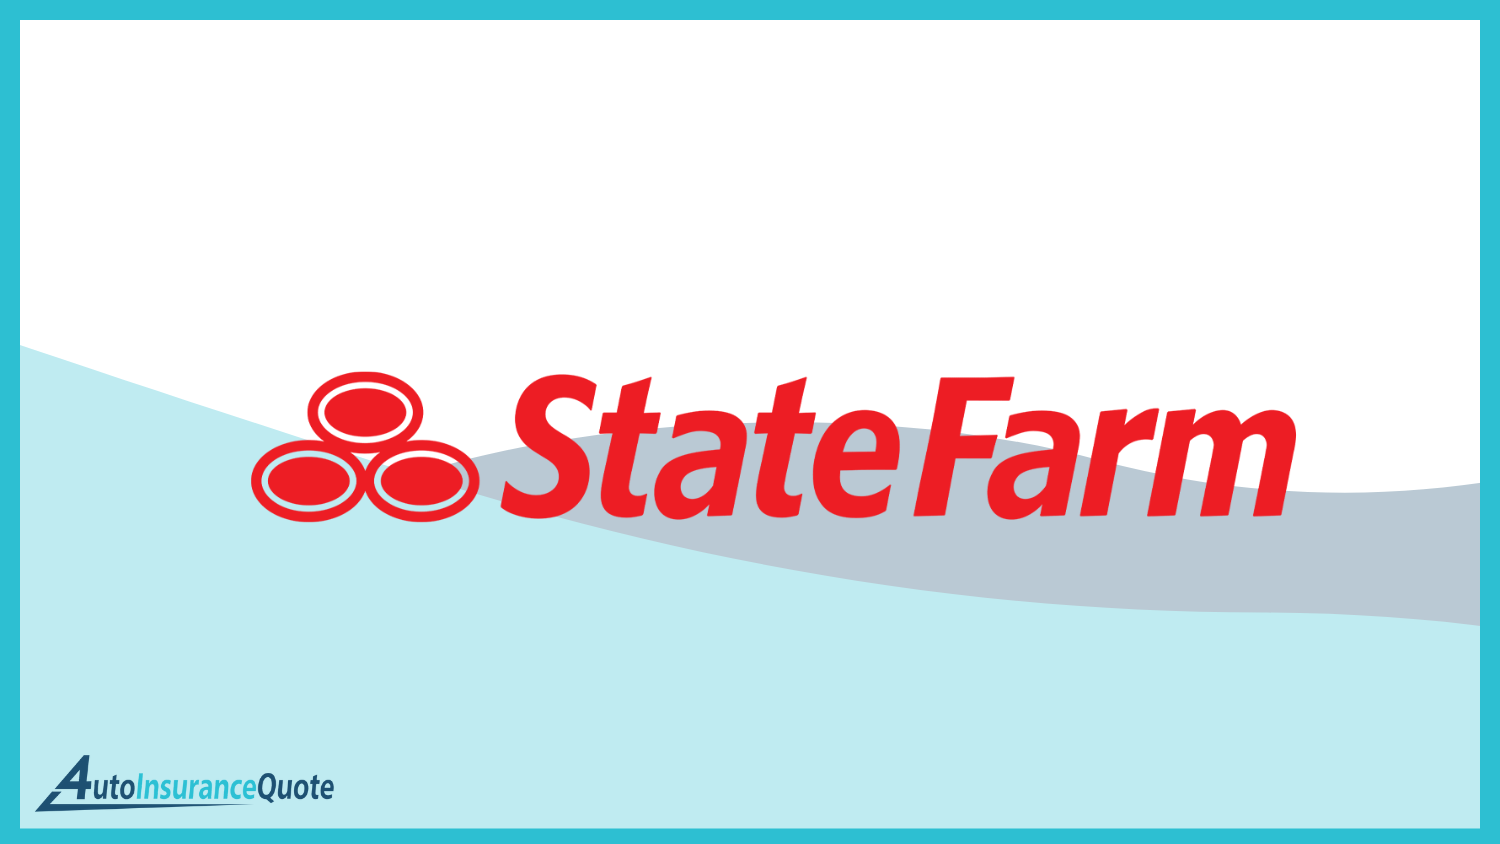 State Farm: Best Auto Insurance for Nannies